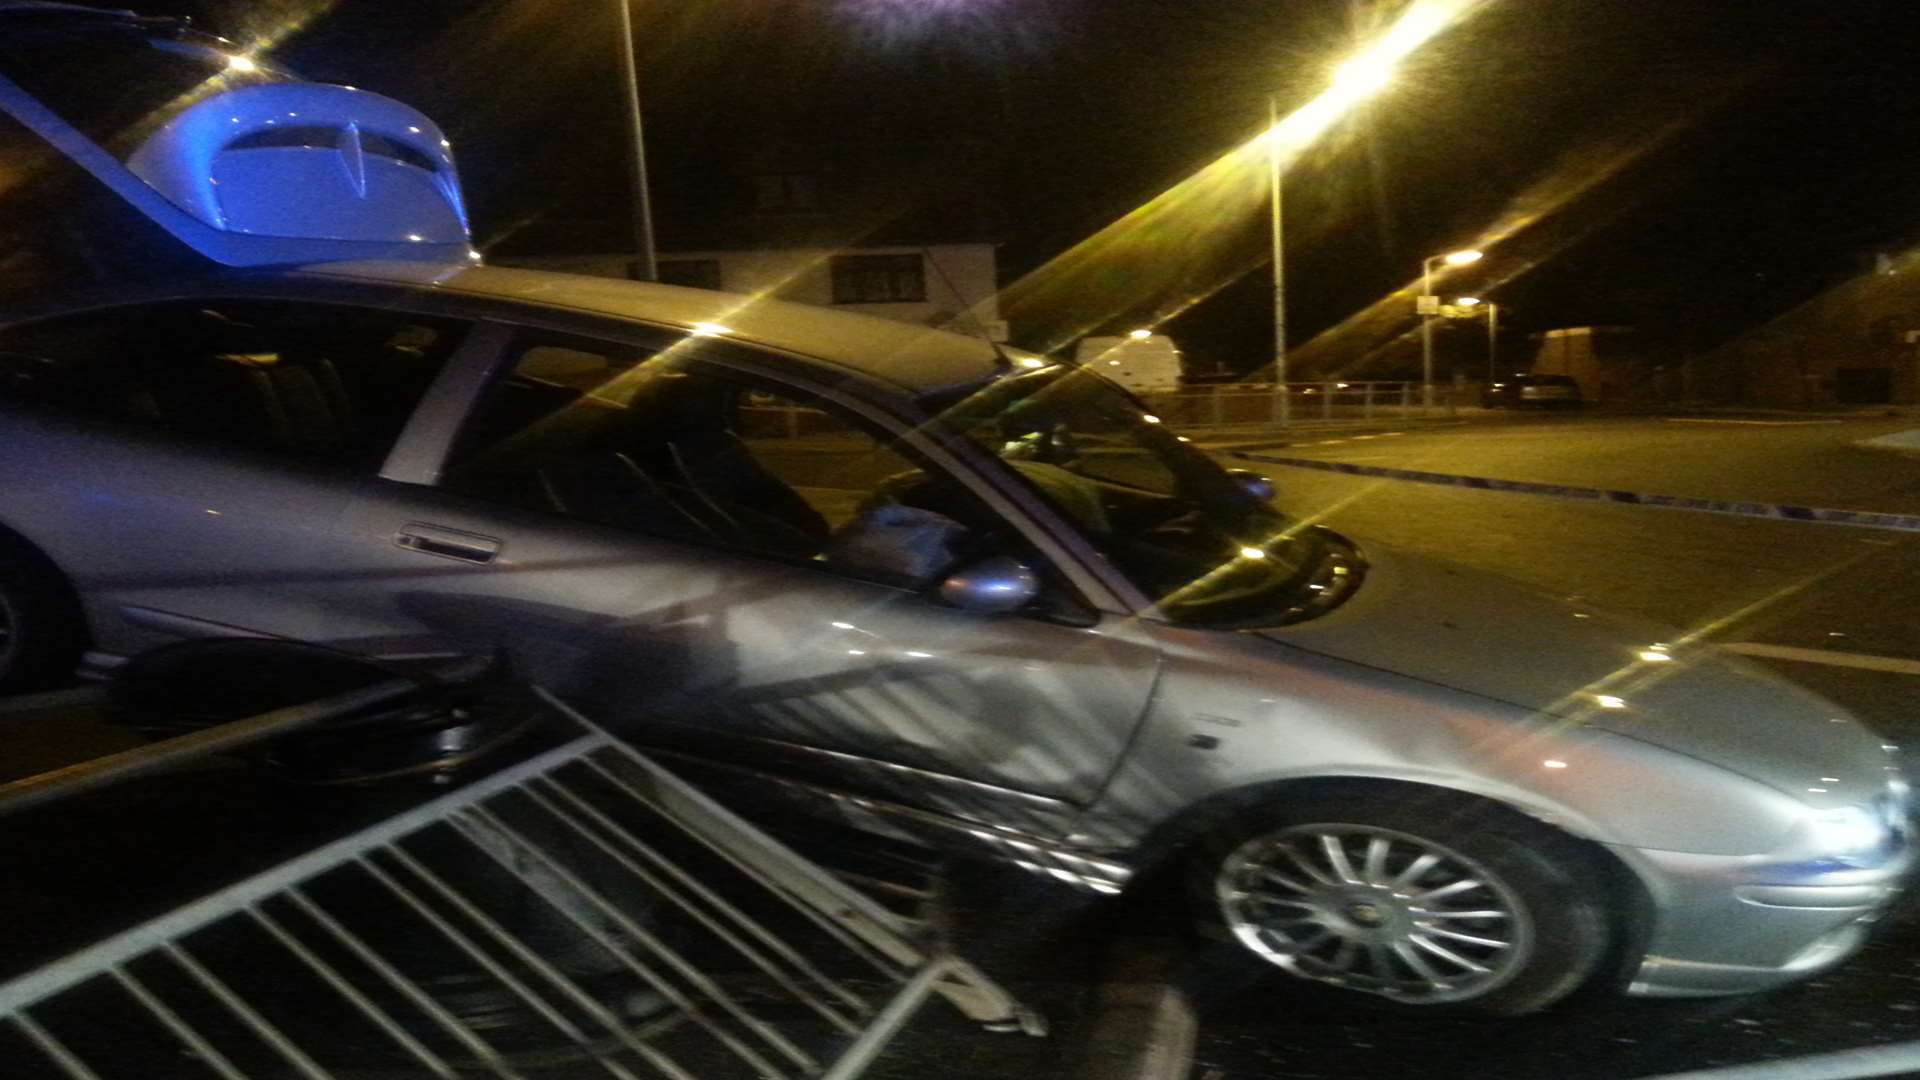 The car somersaulted and went through the Sea St roundabout before landing on railings outside a fish and chip shop